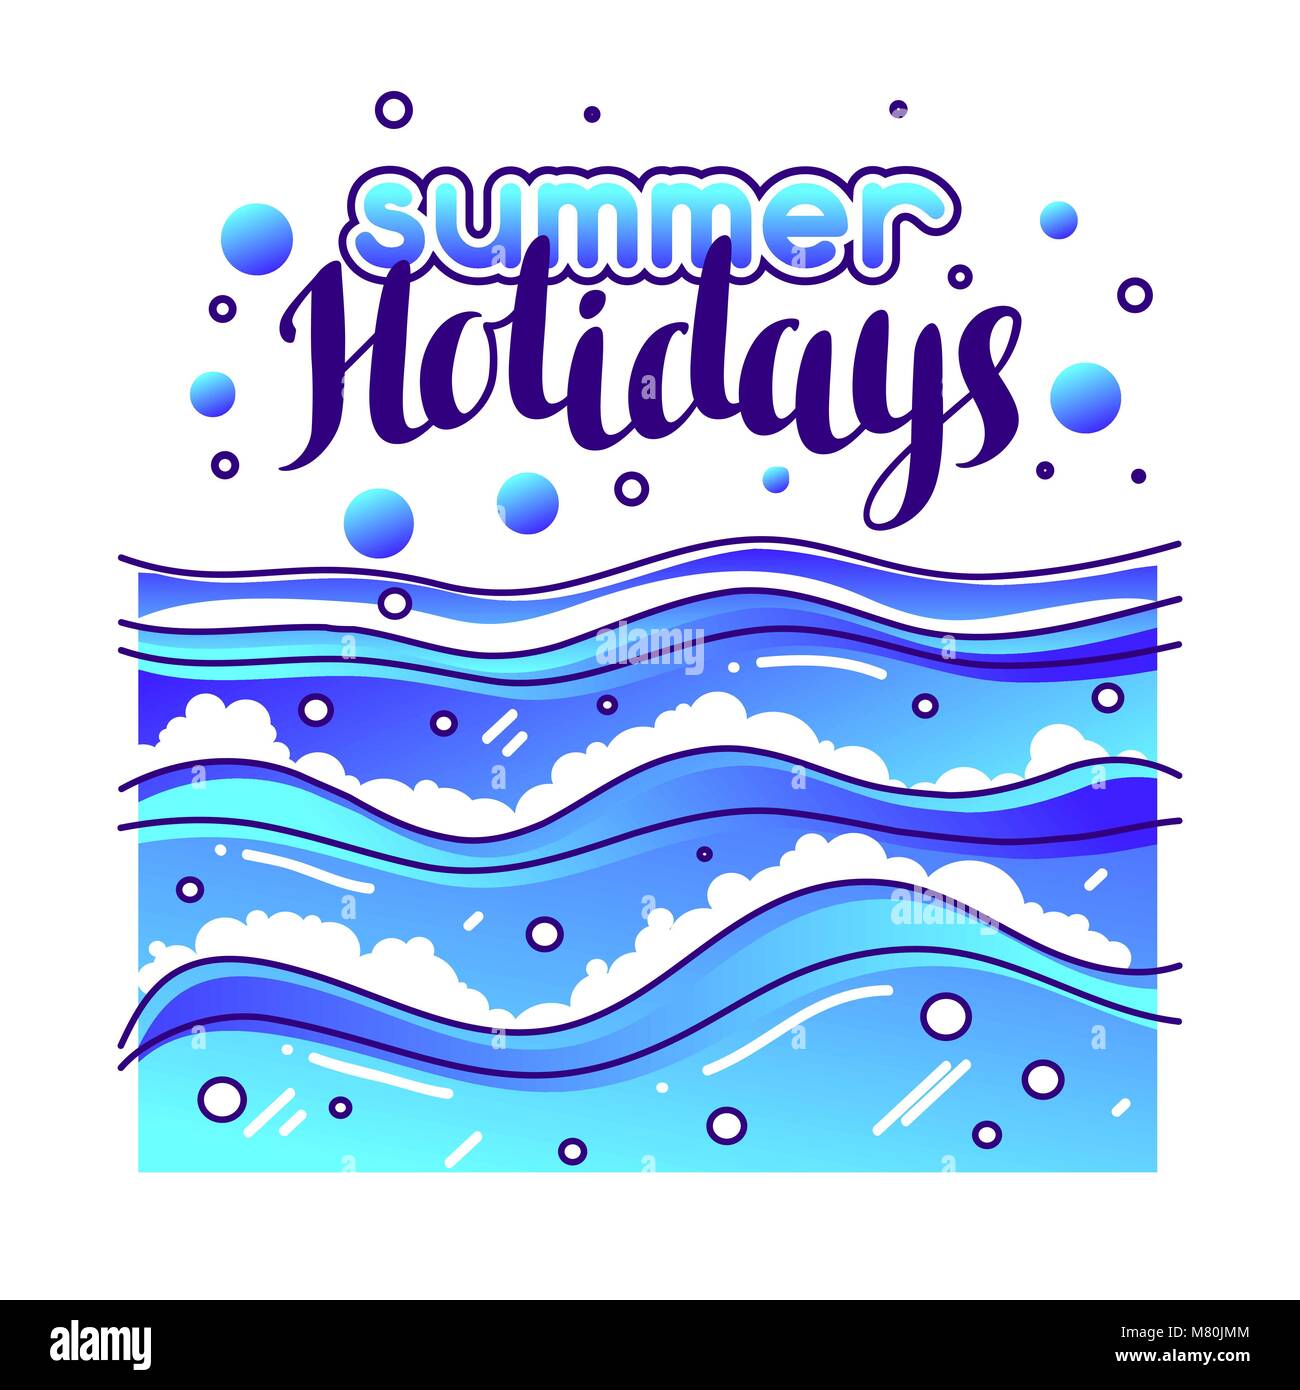 Summer holidays at seaside. Stylized illustration of waves Stock Vector